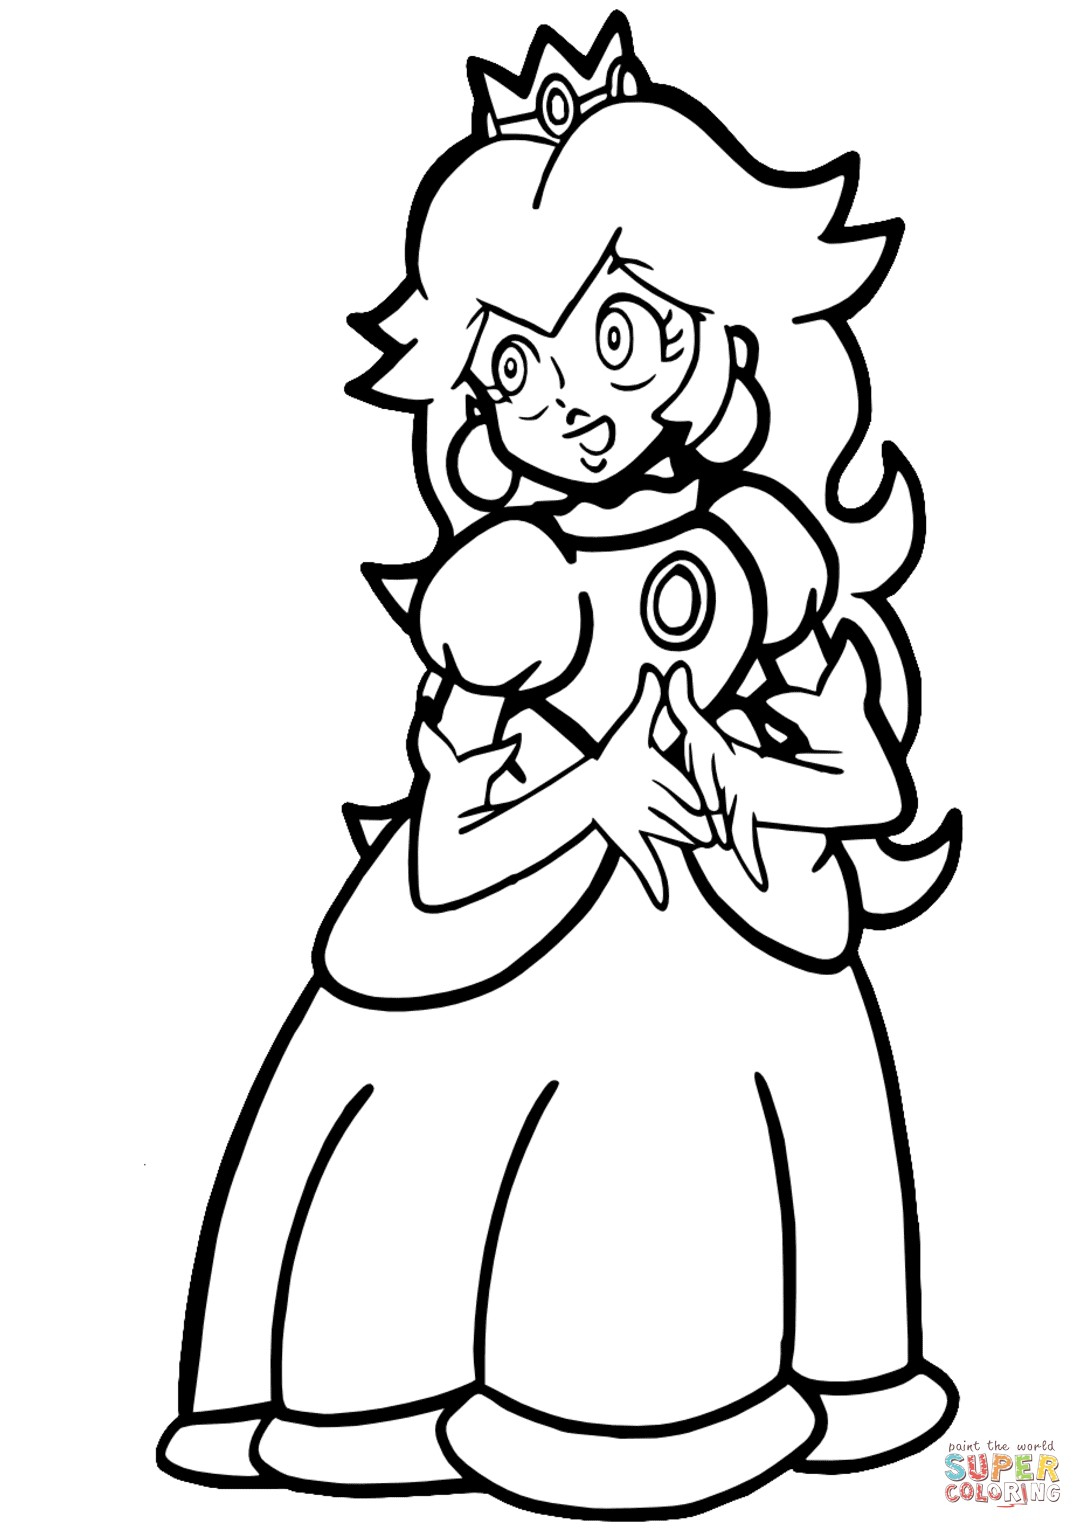 Peach From Mario Coloring Pages Peach Coloring Page Free Coloring Library